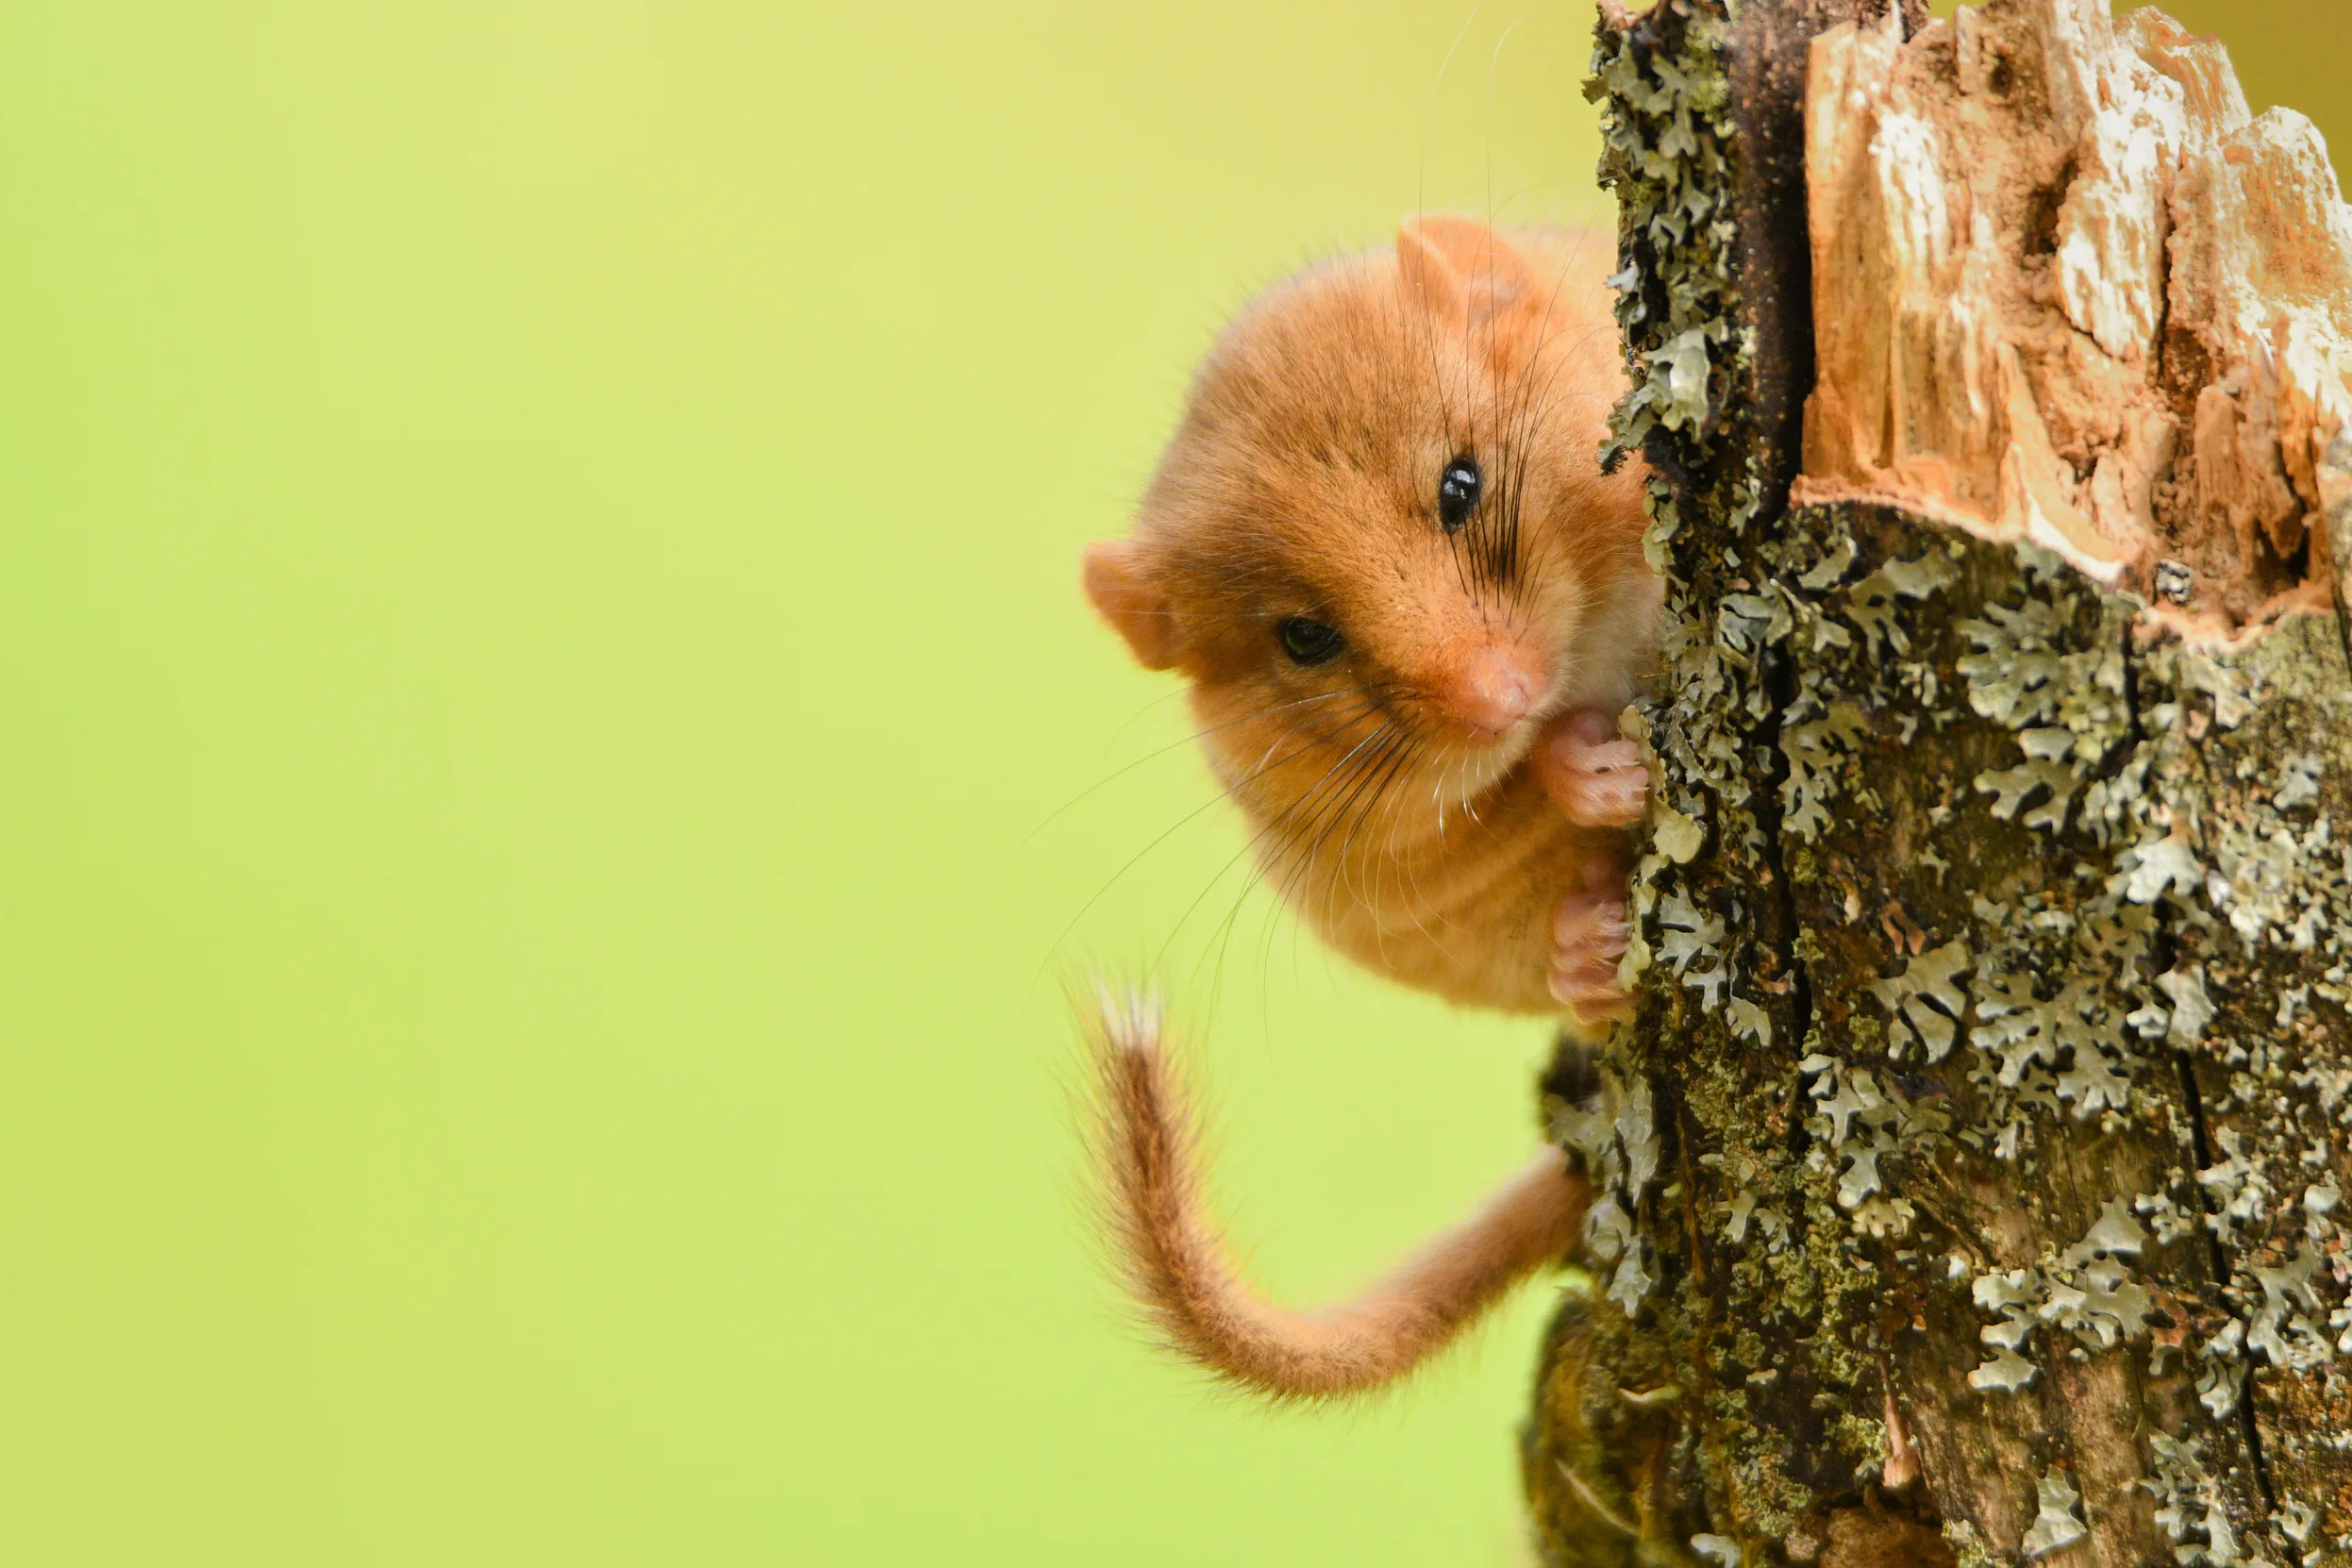 Dormouse peeking out from behind a lichen covered tree stump.